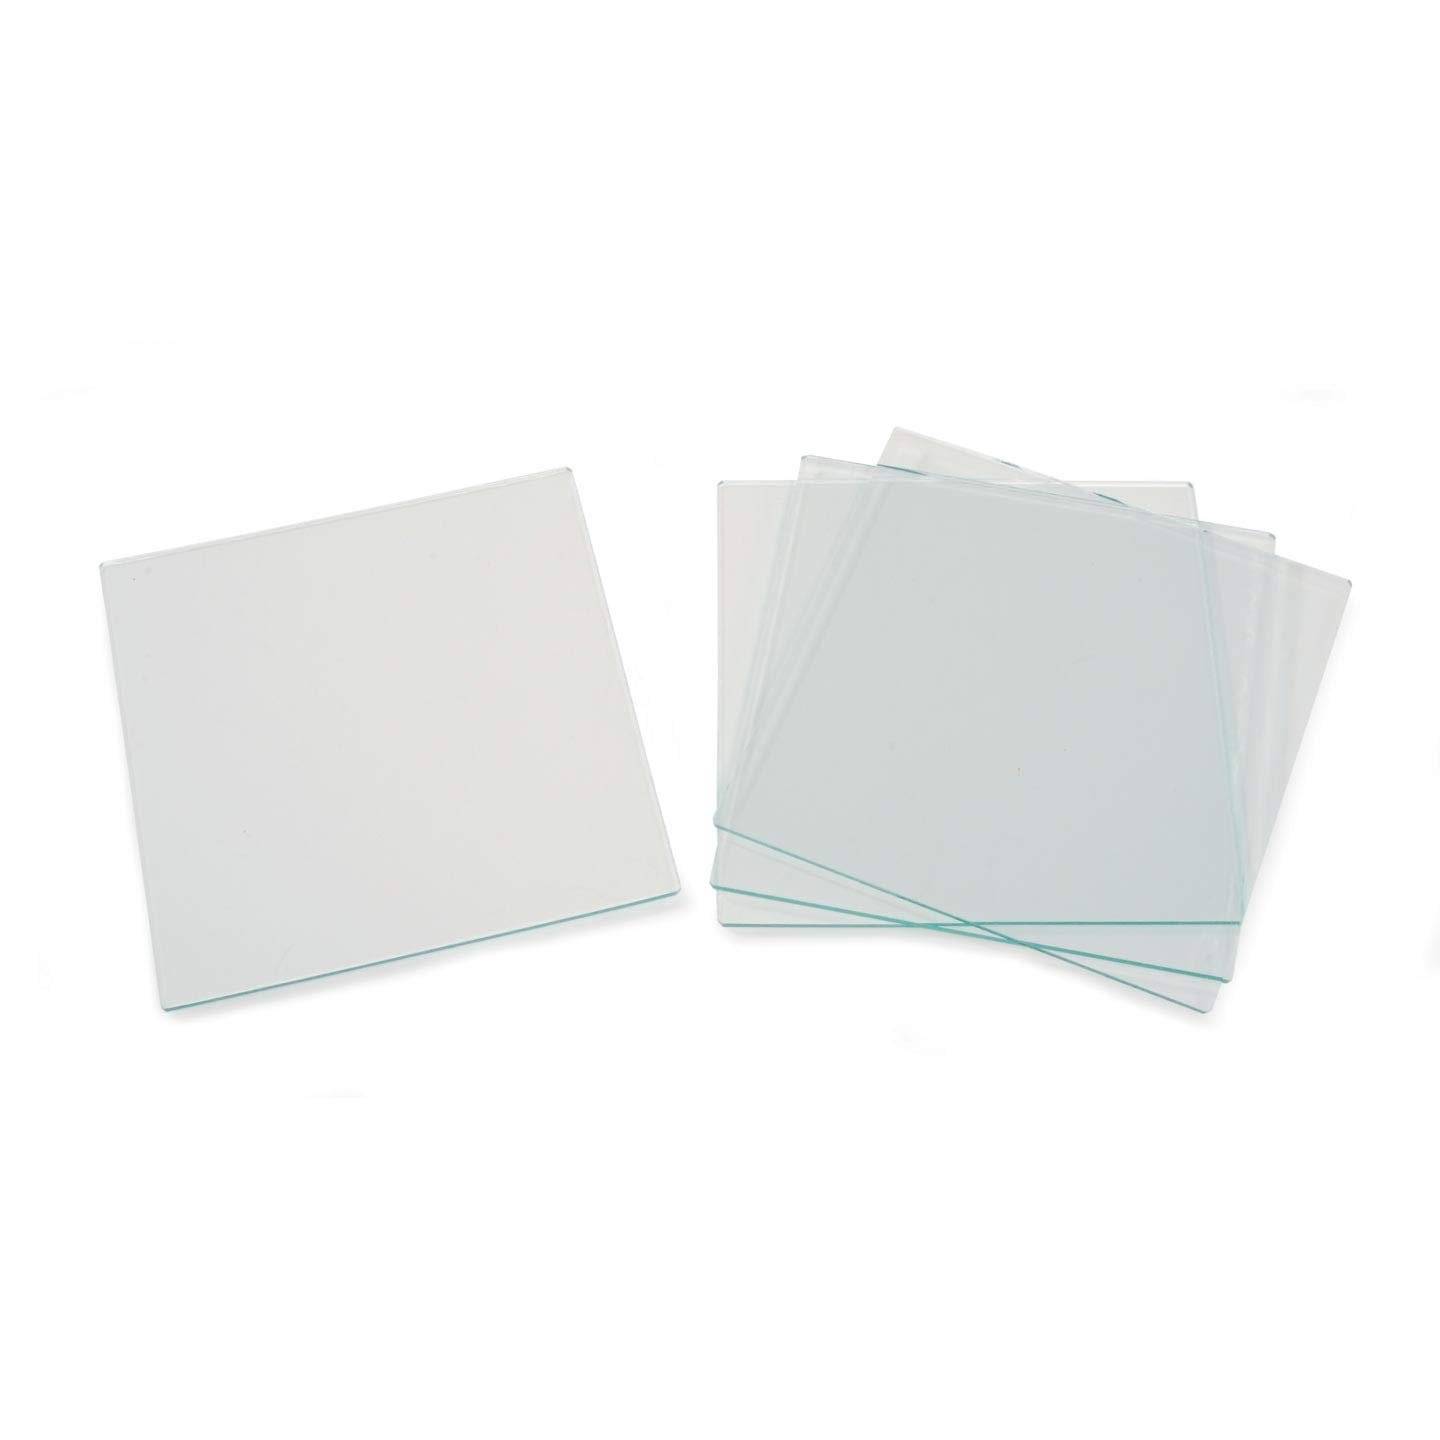 Book Cover Darice Glass Tile Square 4 x 4 inches 4 Pieces (6-Pack) 1098-80